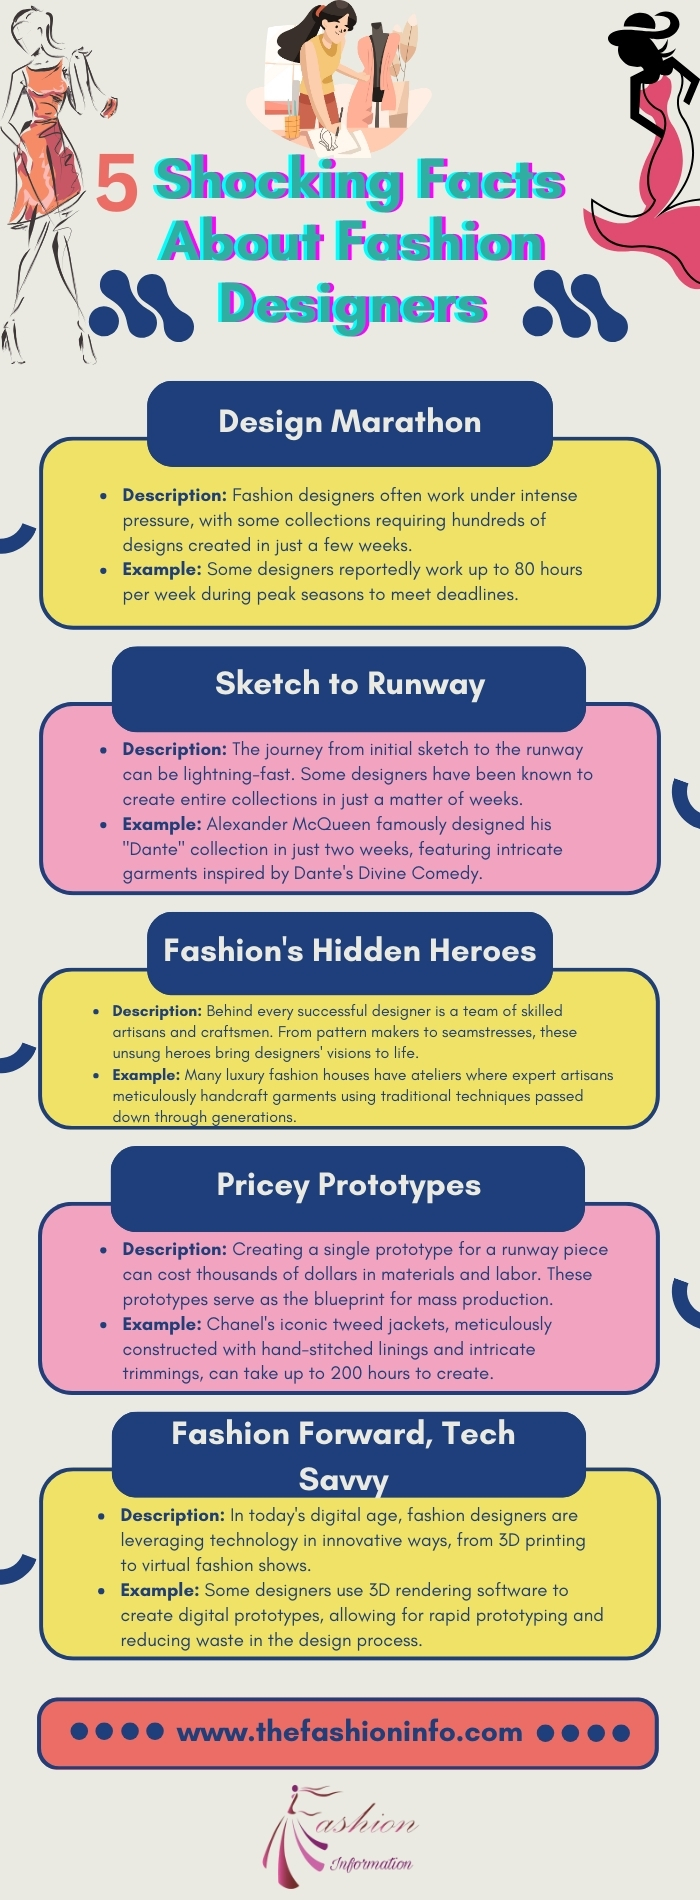 5 Shocking Facts About Fashion Designers